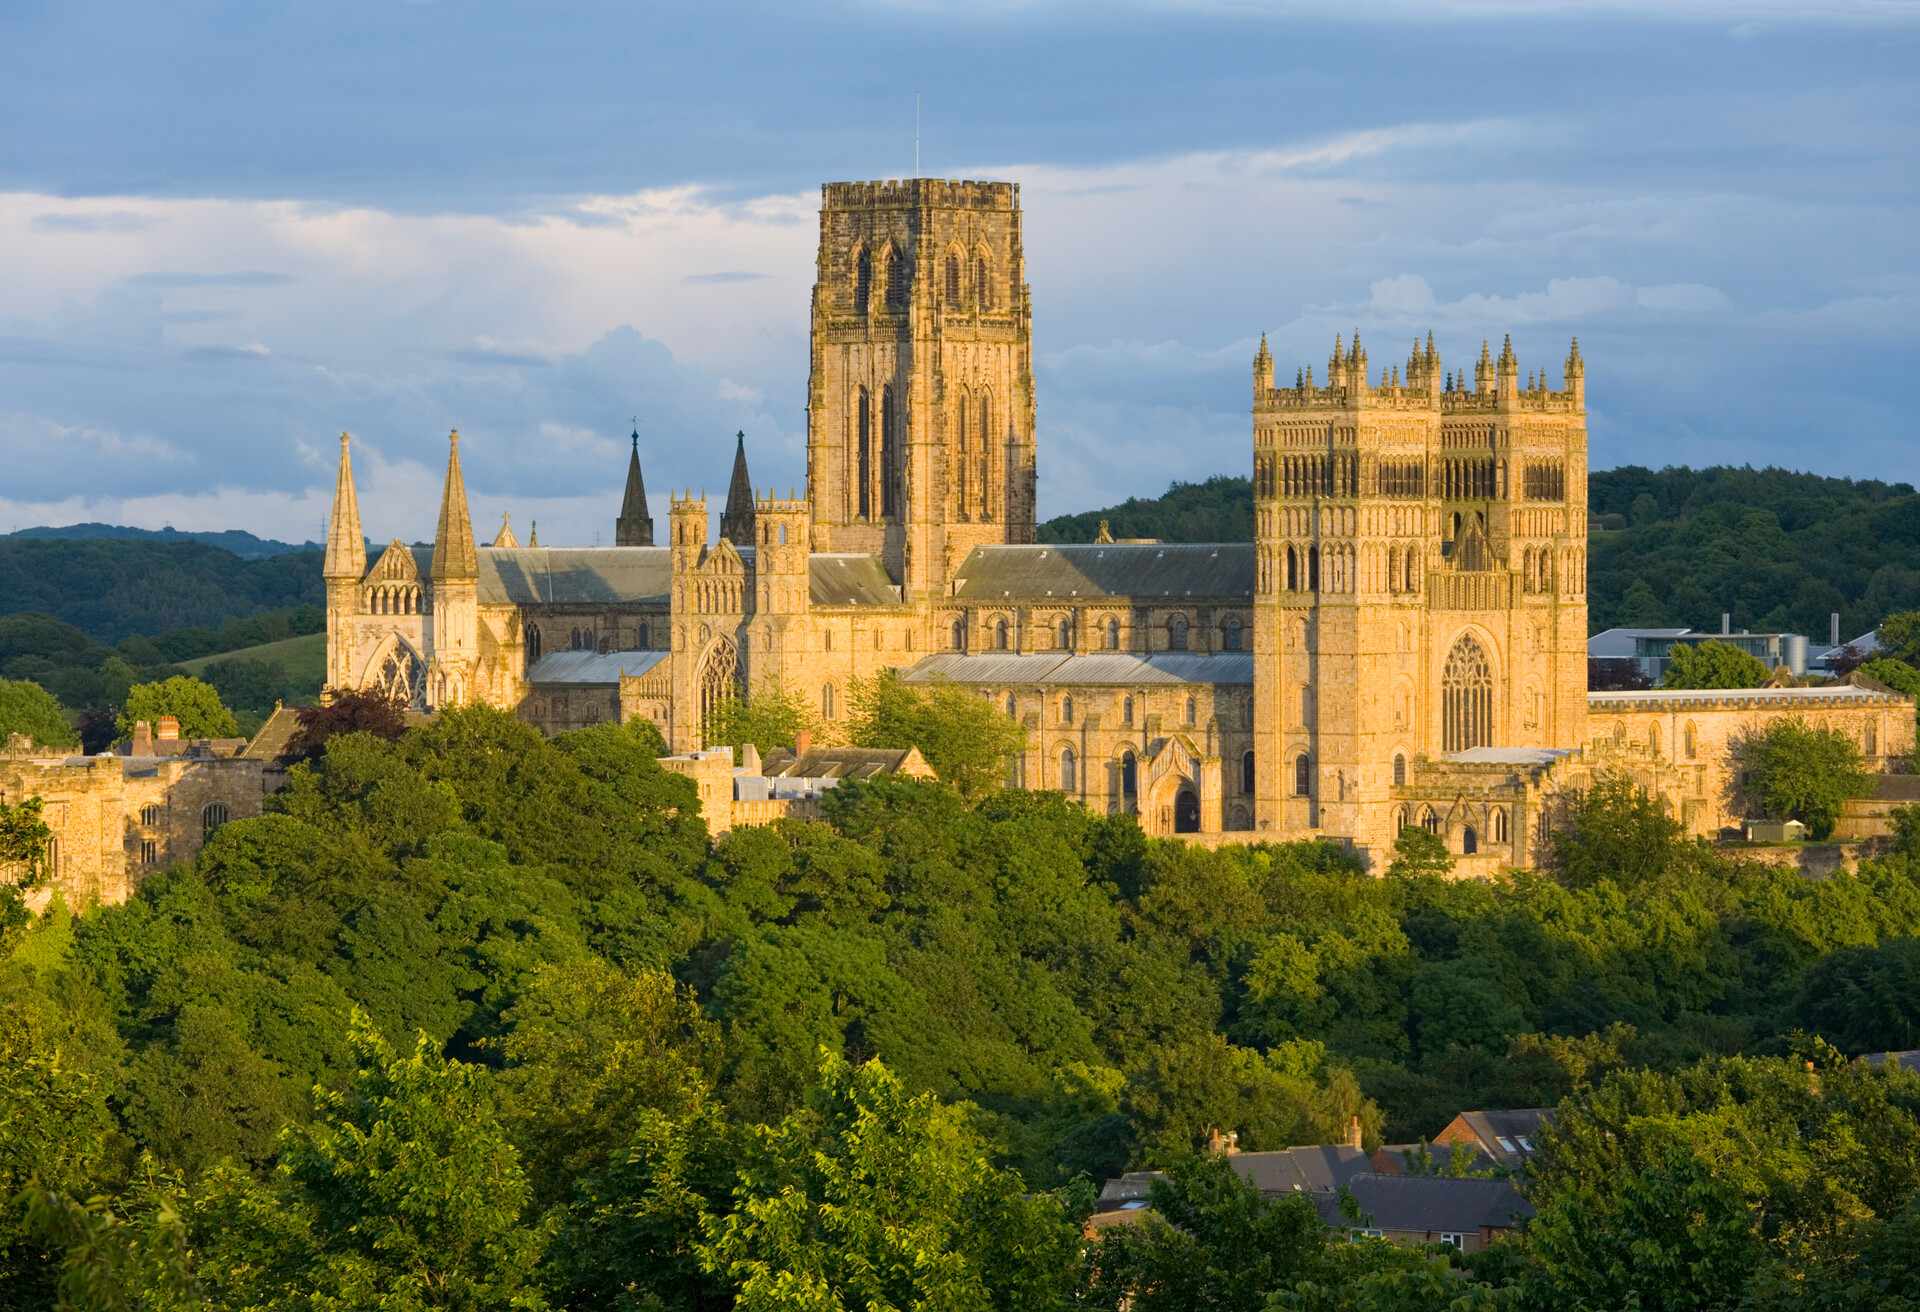 View from hillside at sunset to the cathedral, Durham, County Durham, England, United Kingdom, Europe. Durham Castle and Cathedral were added to the UNESCO World Heritage List in 2008.